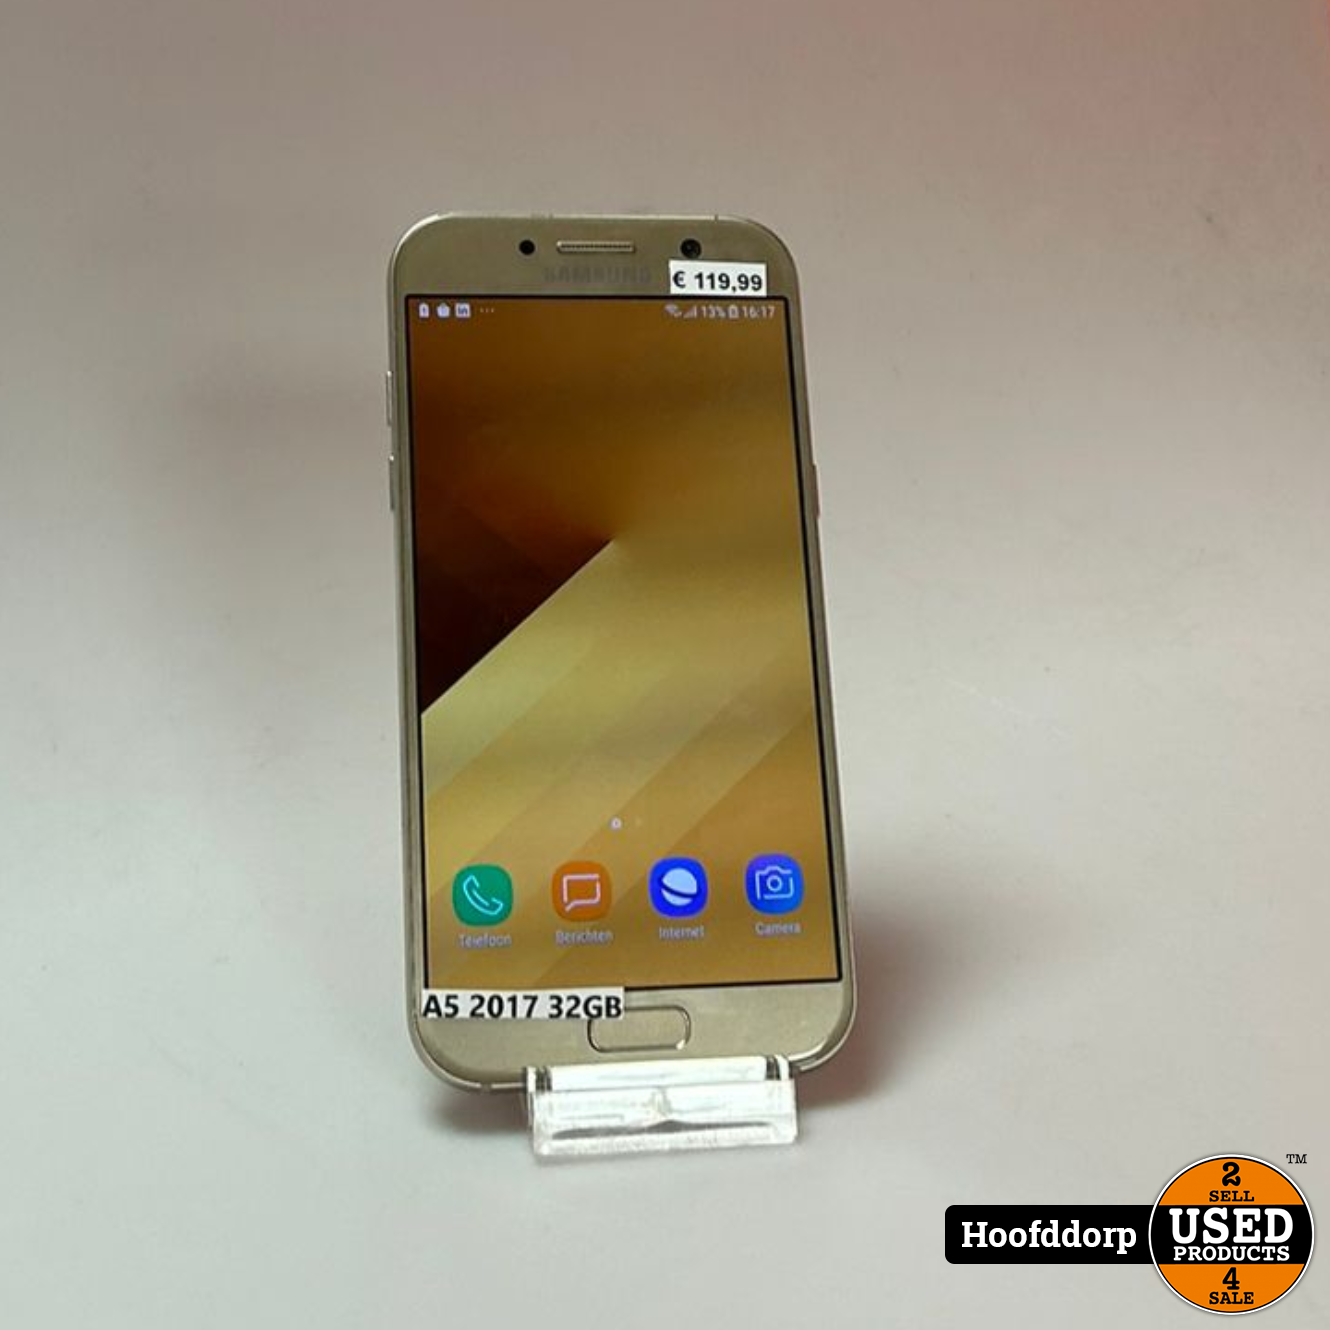 Stier zonlicht Idool Samsung Galaxy A5 2017 Gold - Used Products Hoofddorp